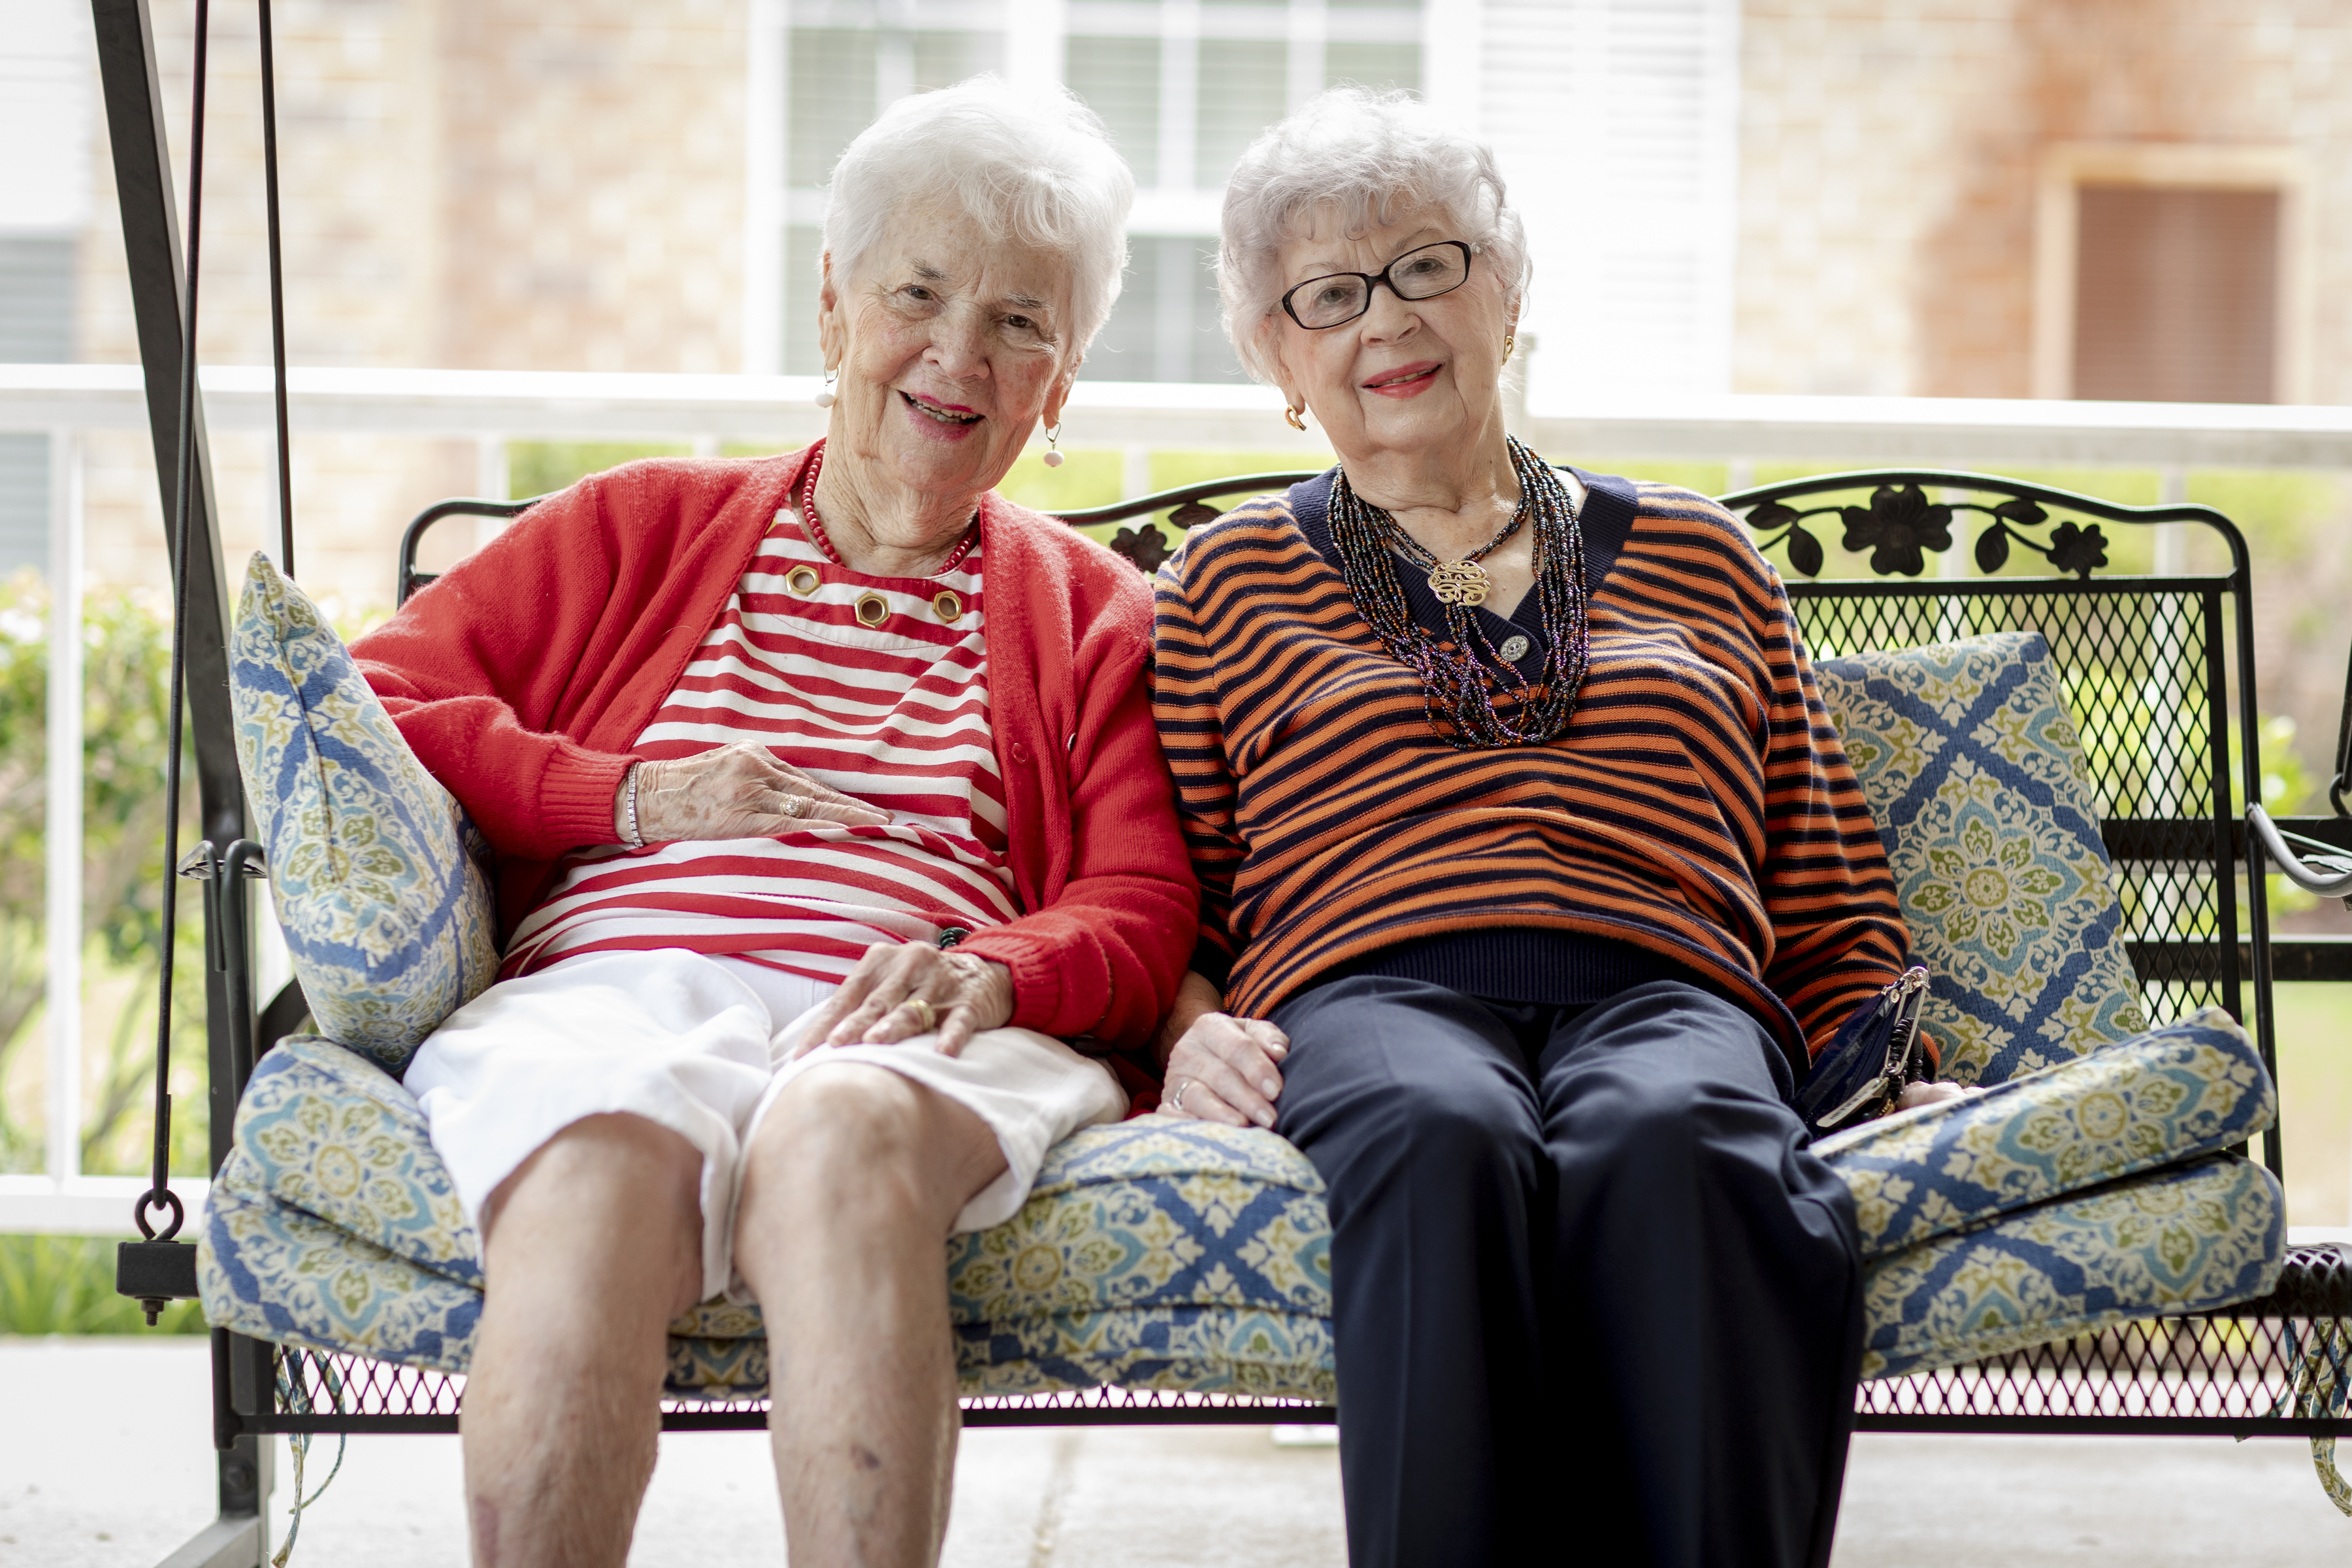 Residents on Patio Swing